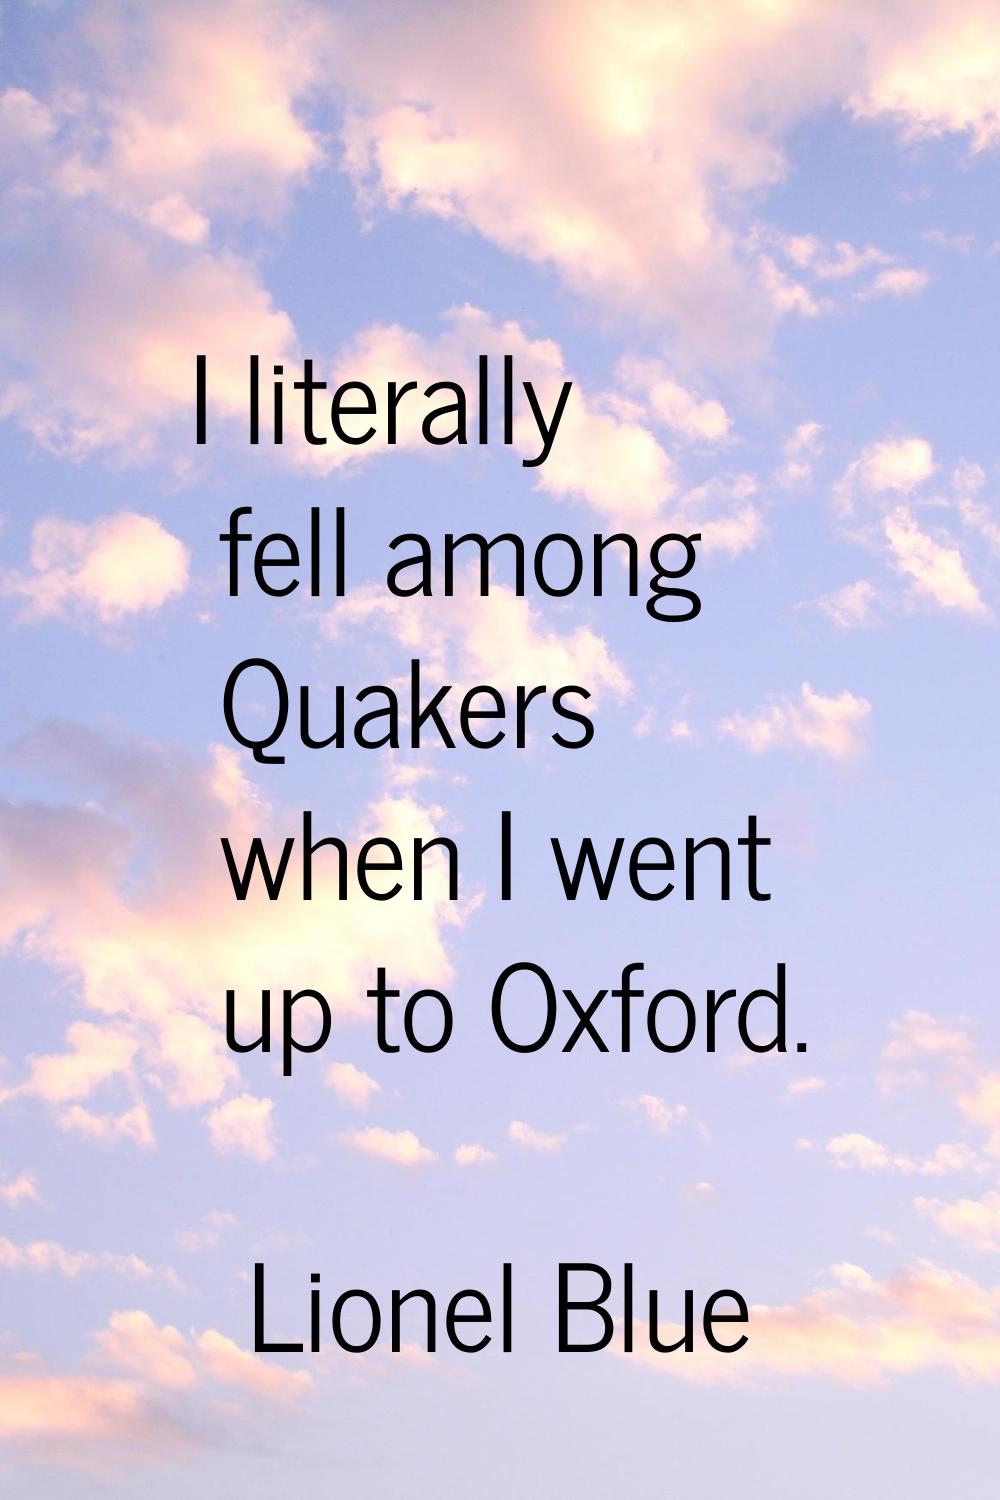 I literally fell among Quakers when I went up to Oxford.